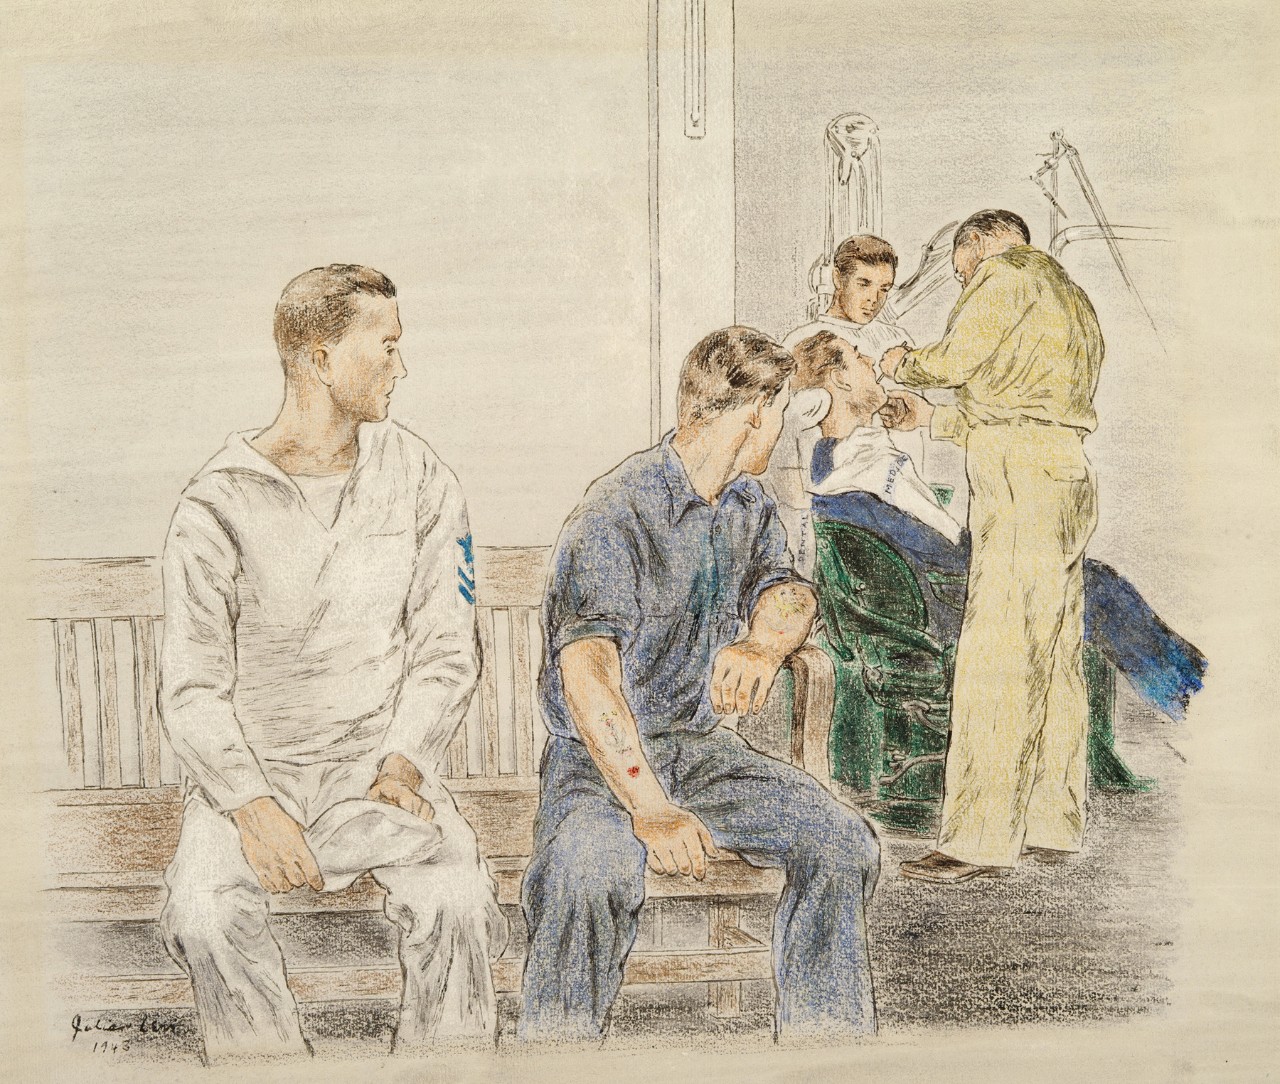 Two sailors watch as a dentist and his assistant treat another sailor